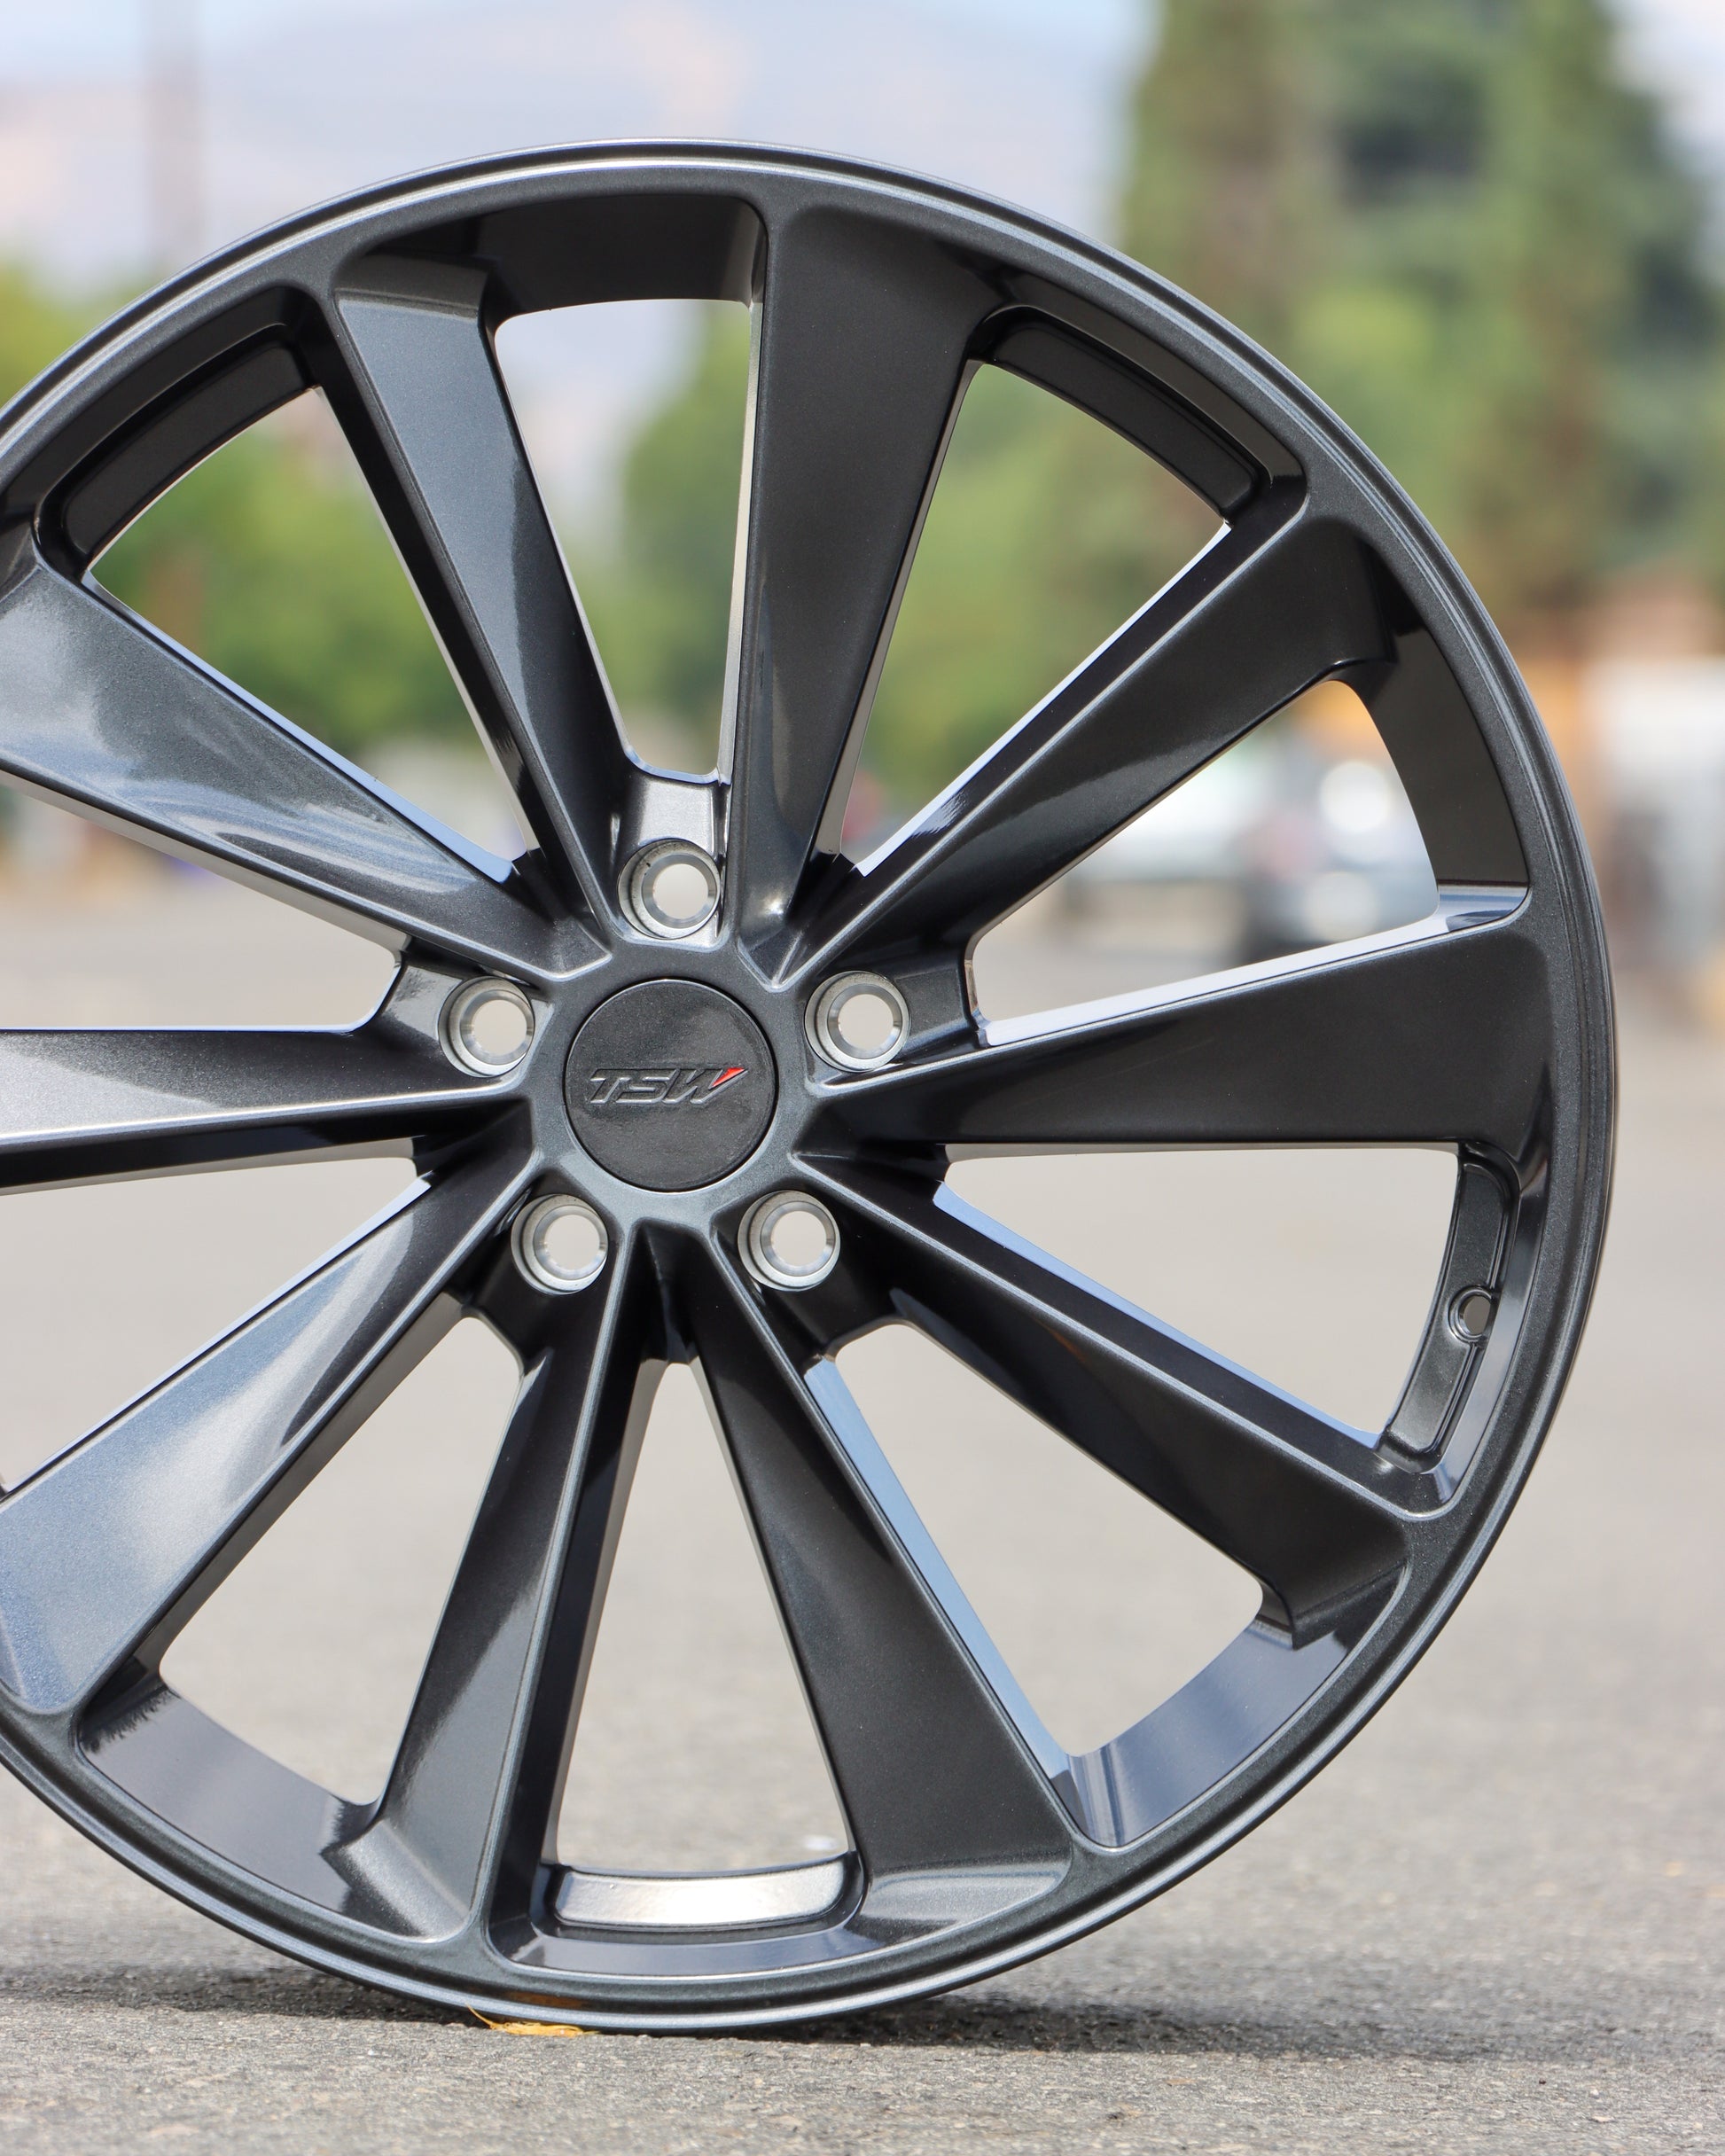 TSW Aileron Wheel in a gunmetal gray finish sitting in the middle of the street.